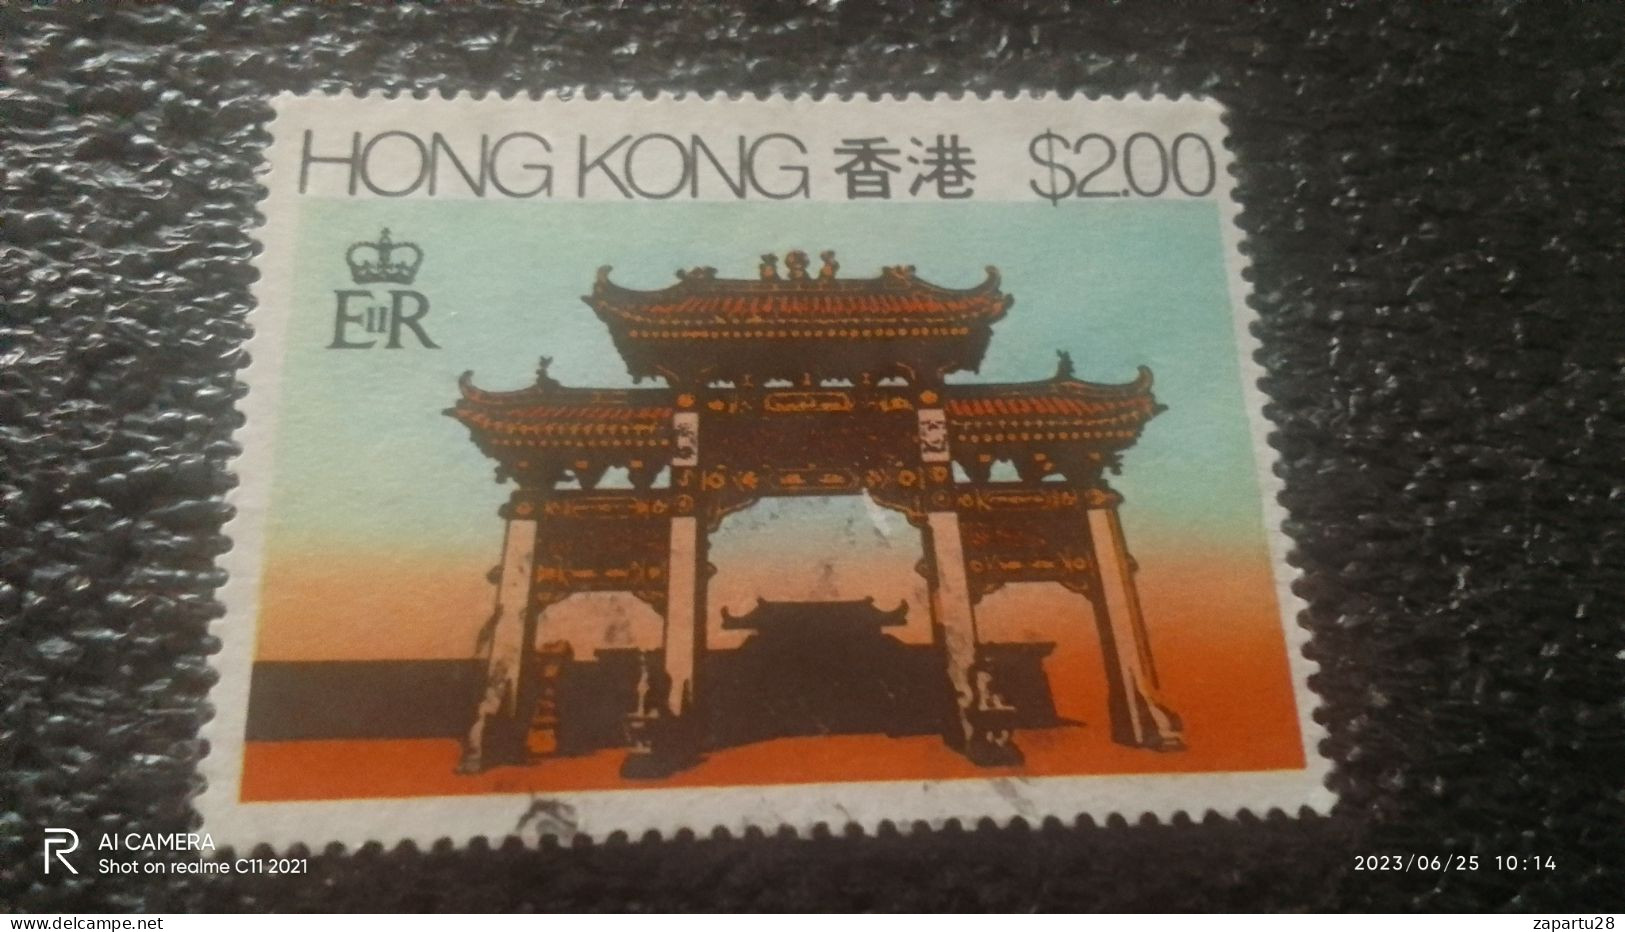 HONG KONG-1980-90              2$        USED - Used Stamps